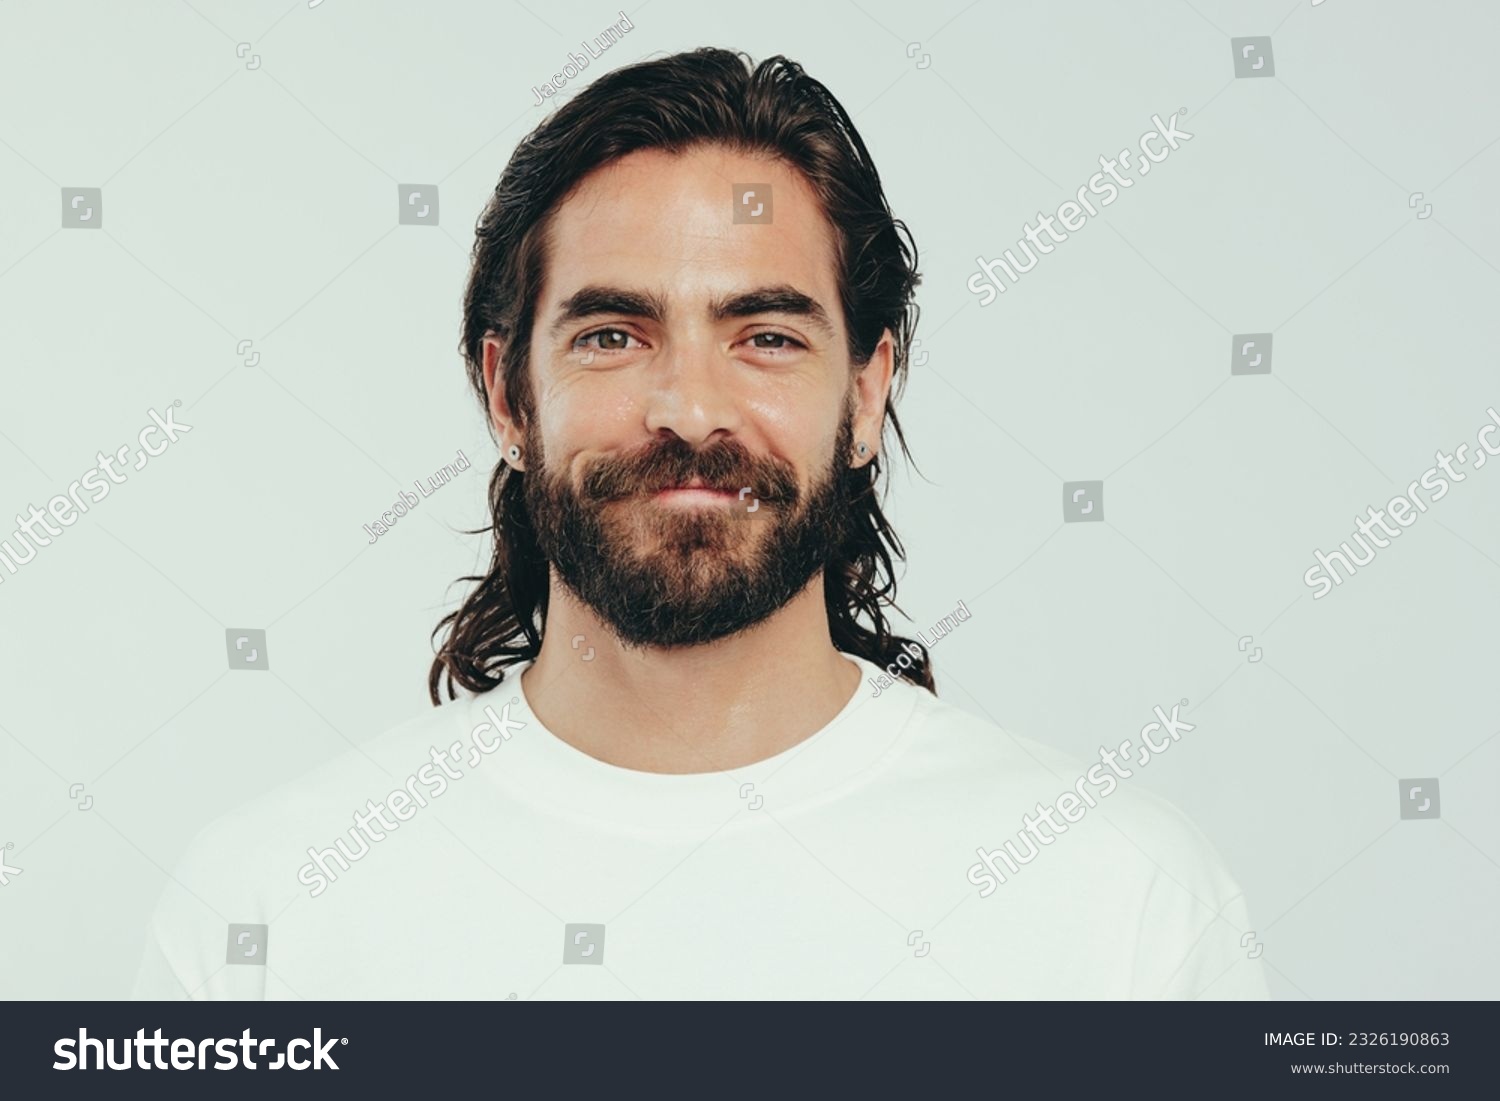 Portrait of a confident young man looking at the camera in a studio, proudly wearing a beard and long hair. Man with a beautiful appearance embracing his personal grooming and self-care. #2326190863